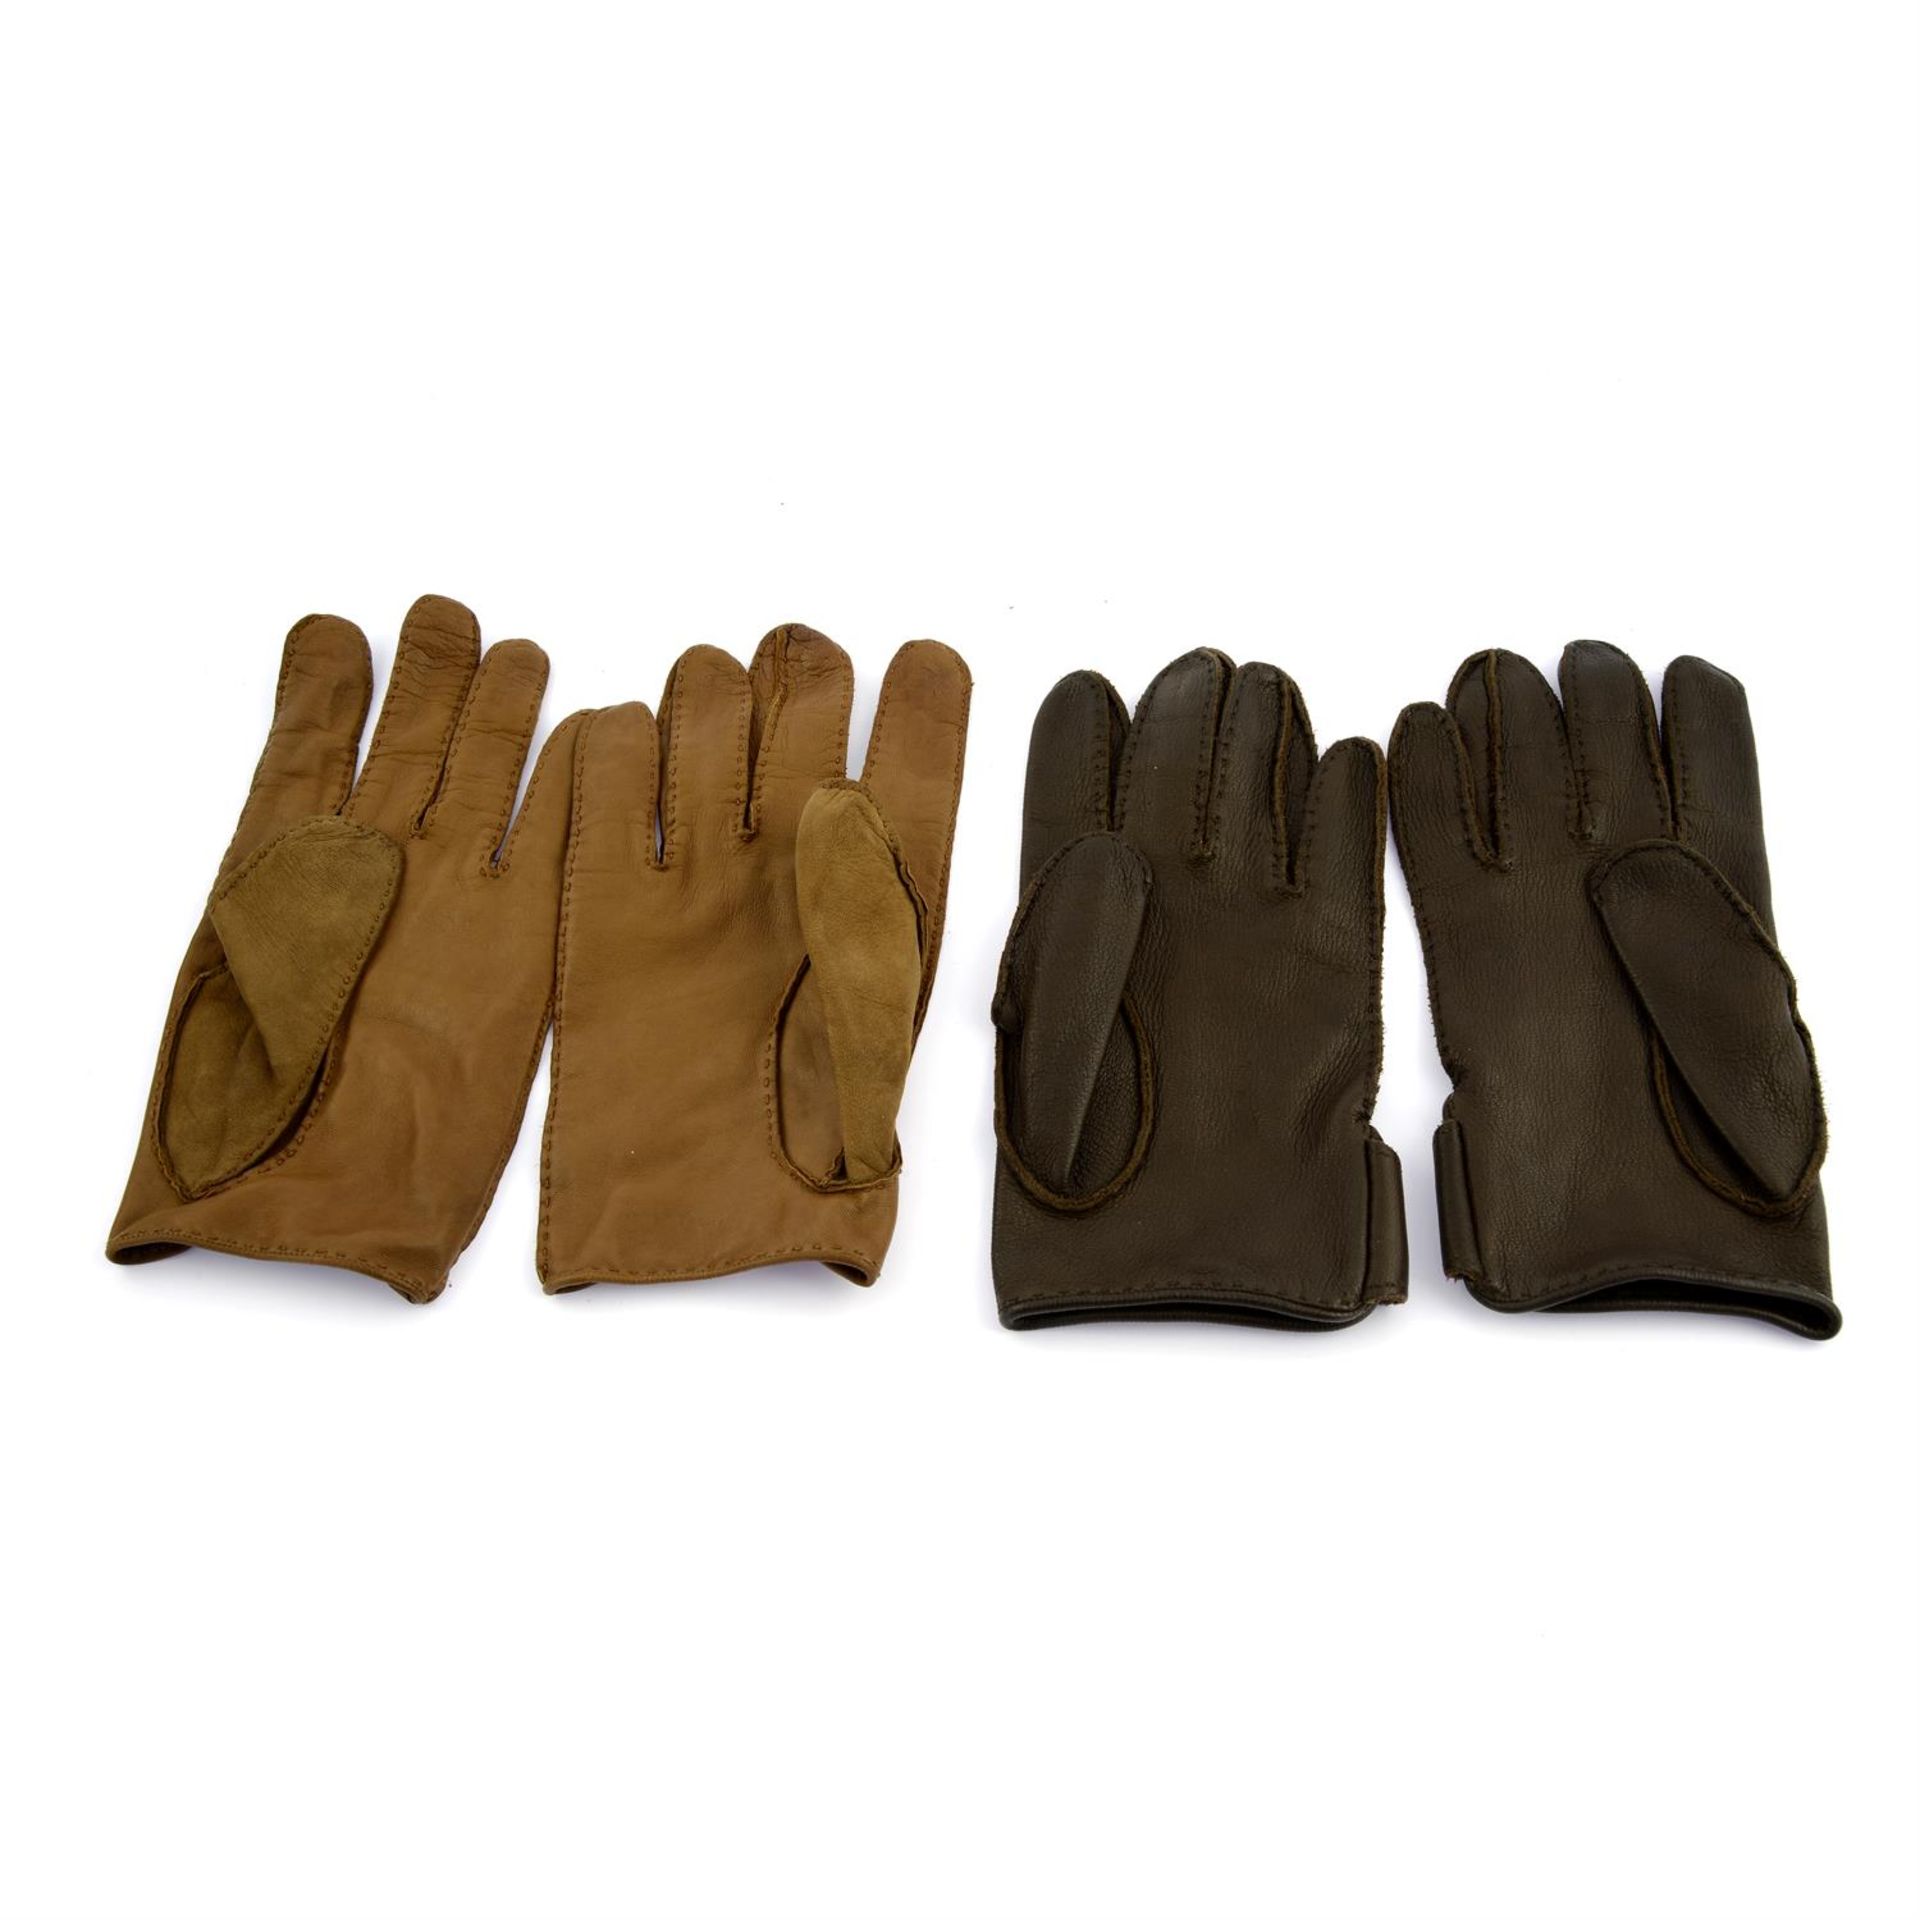 HERMÈS - two pairs of leather gloves. - Image 3 of 3